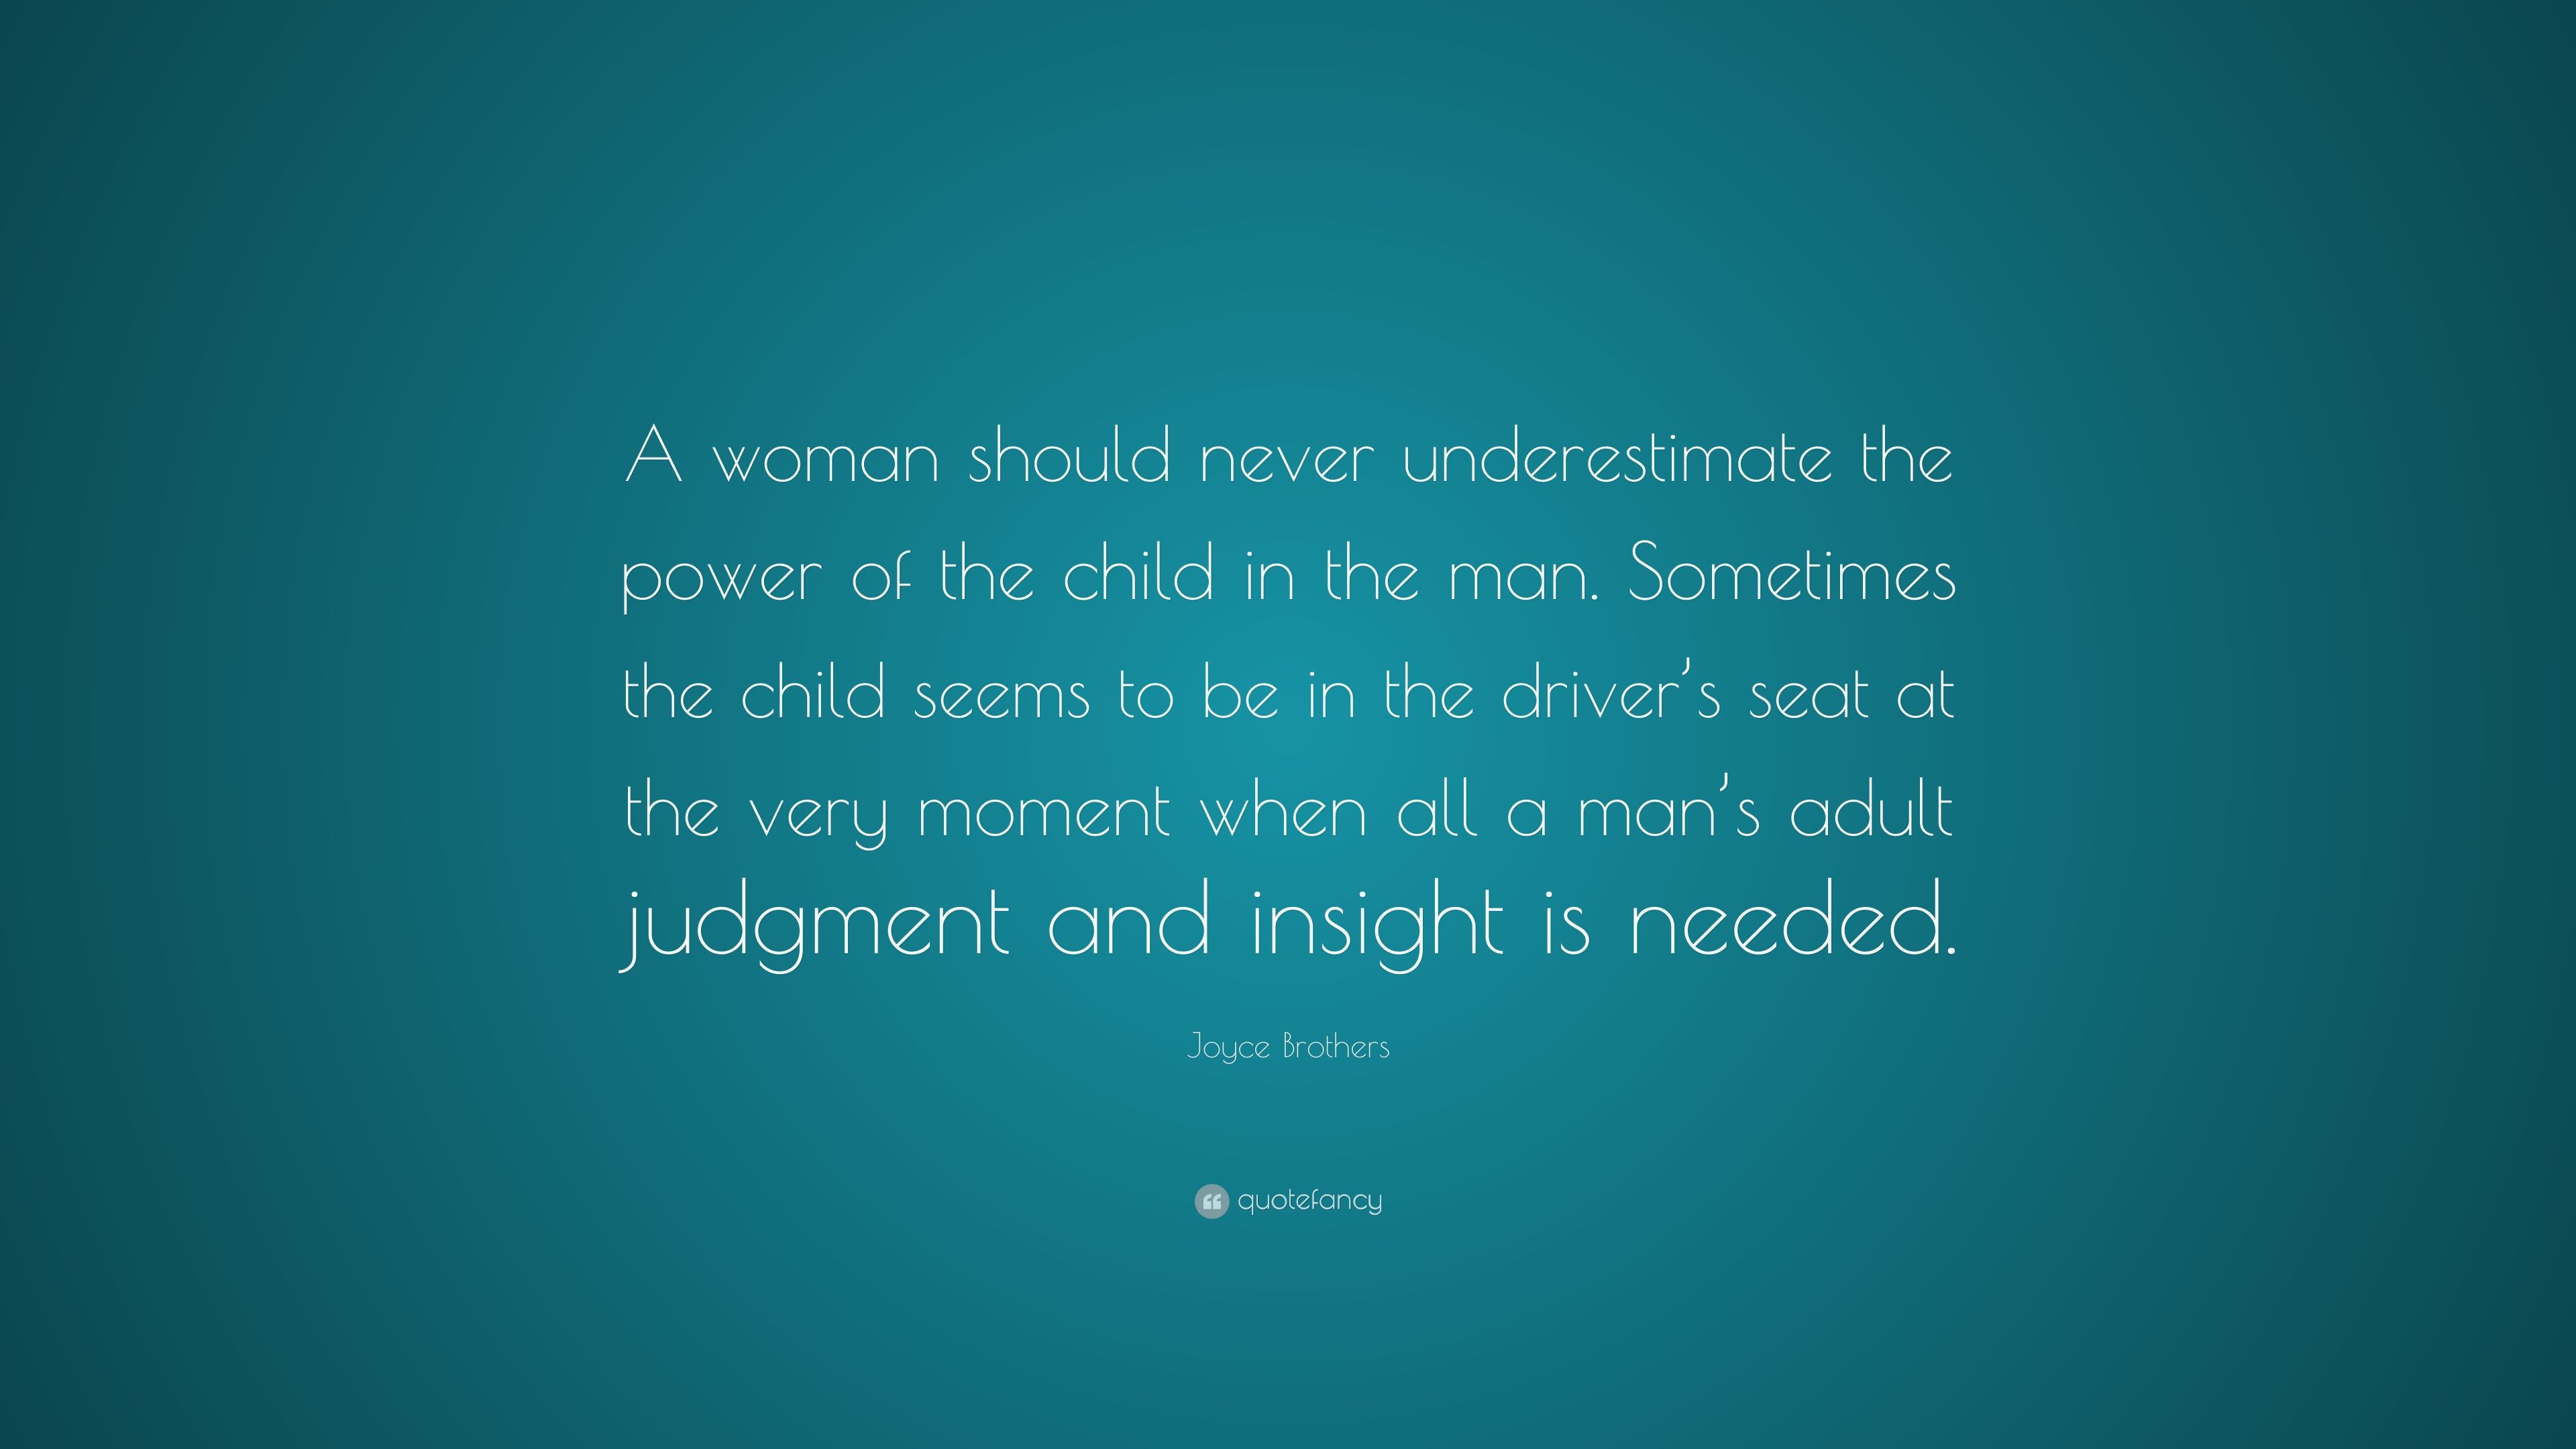 Joyce Brothers Quote: “A woman should never underestimate